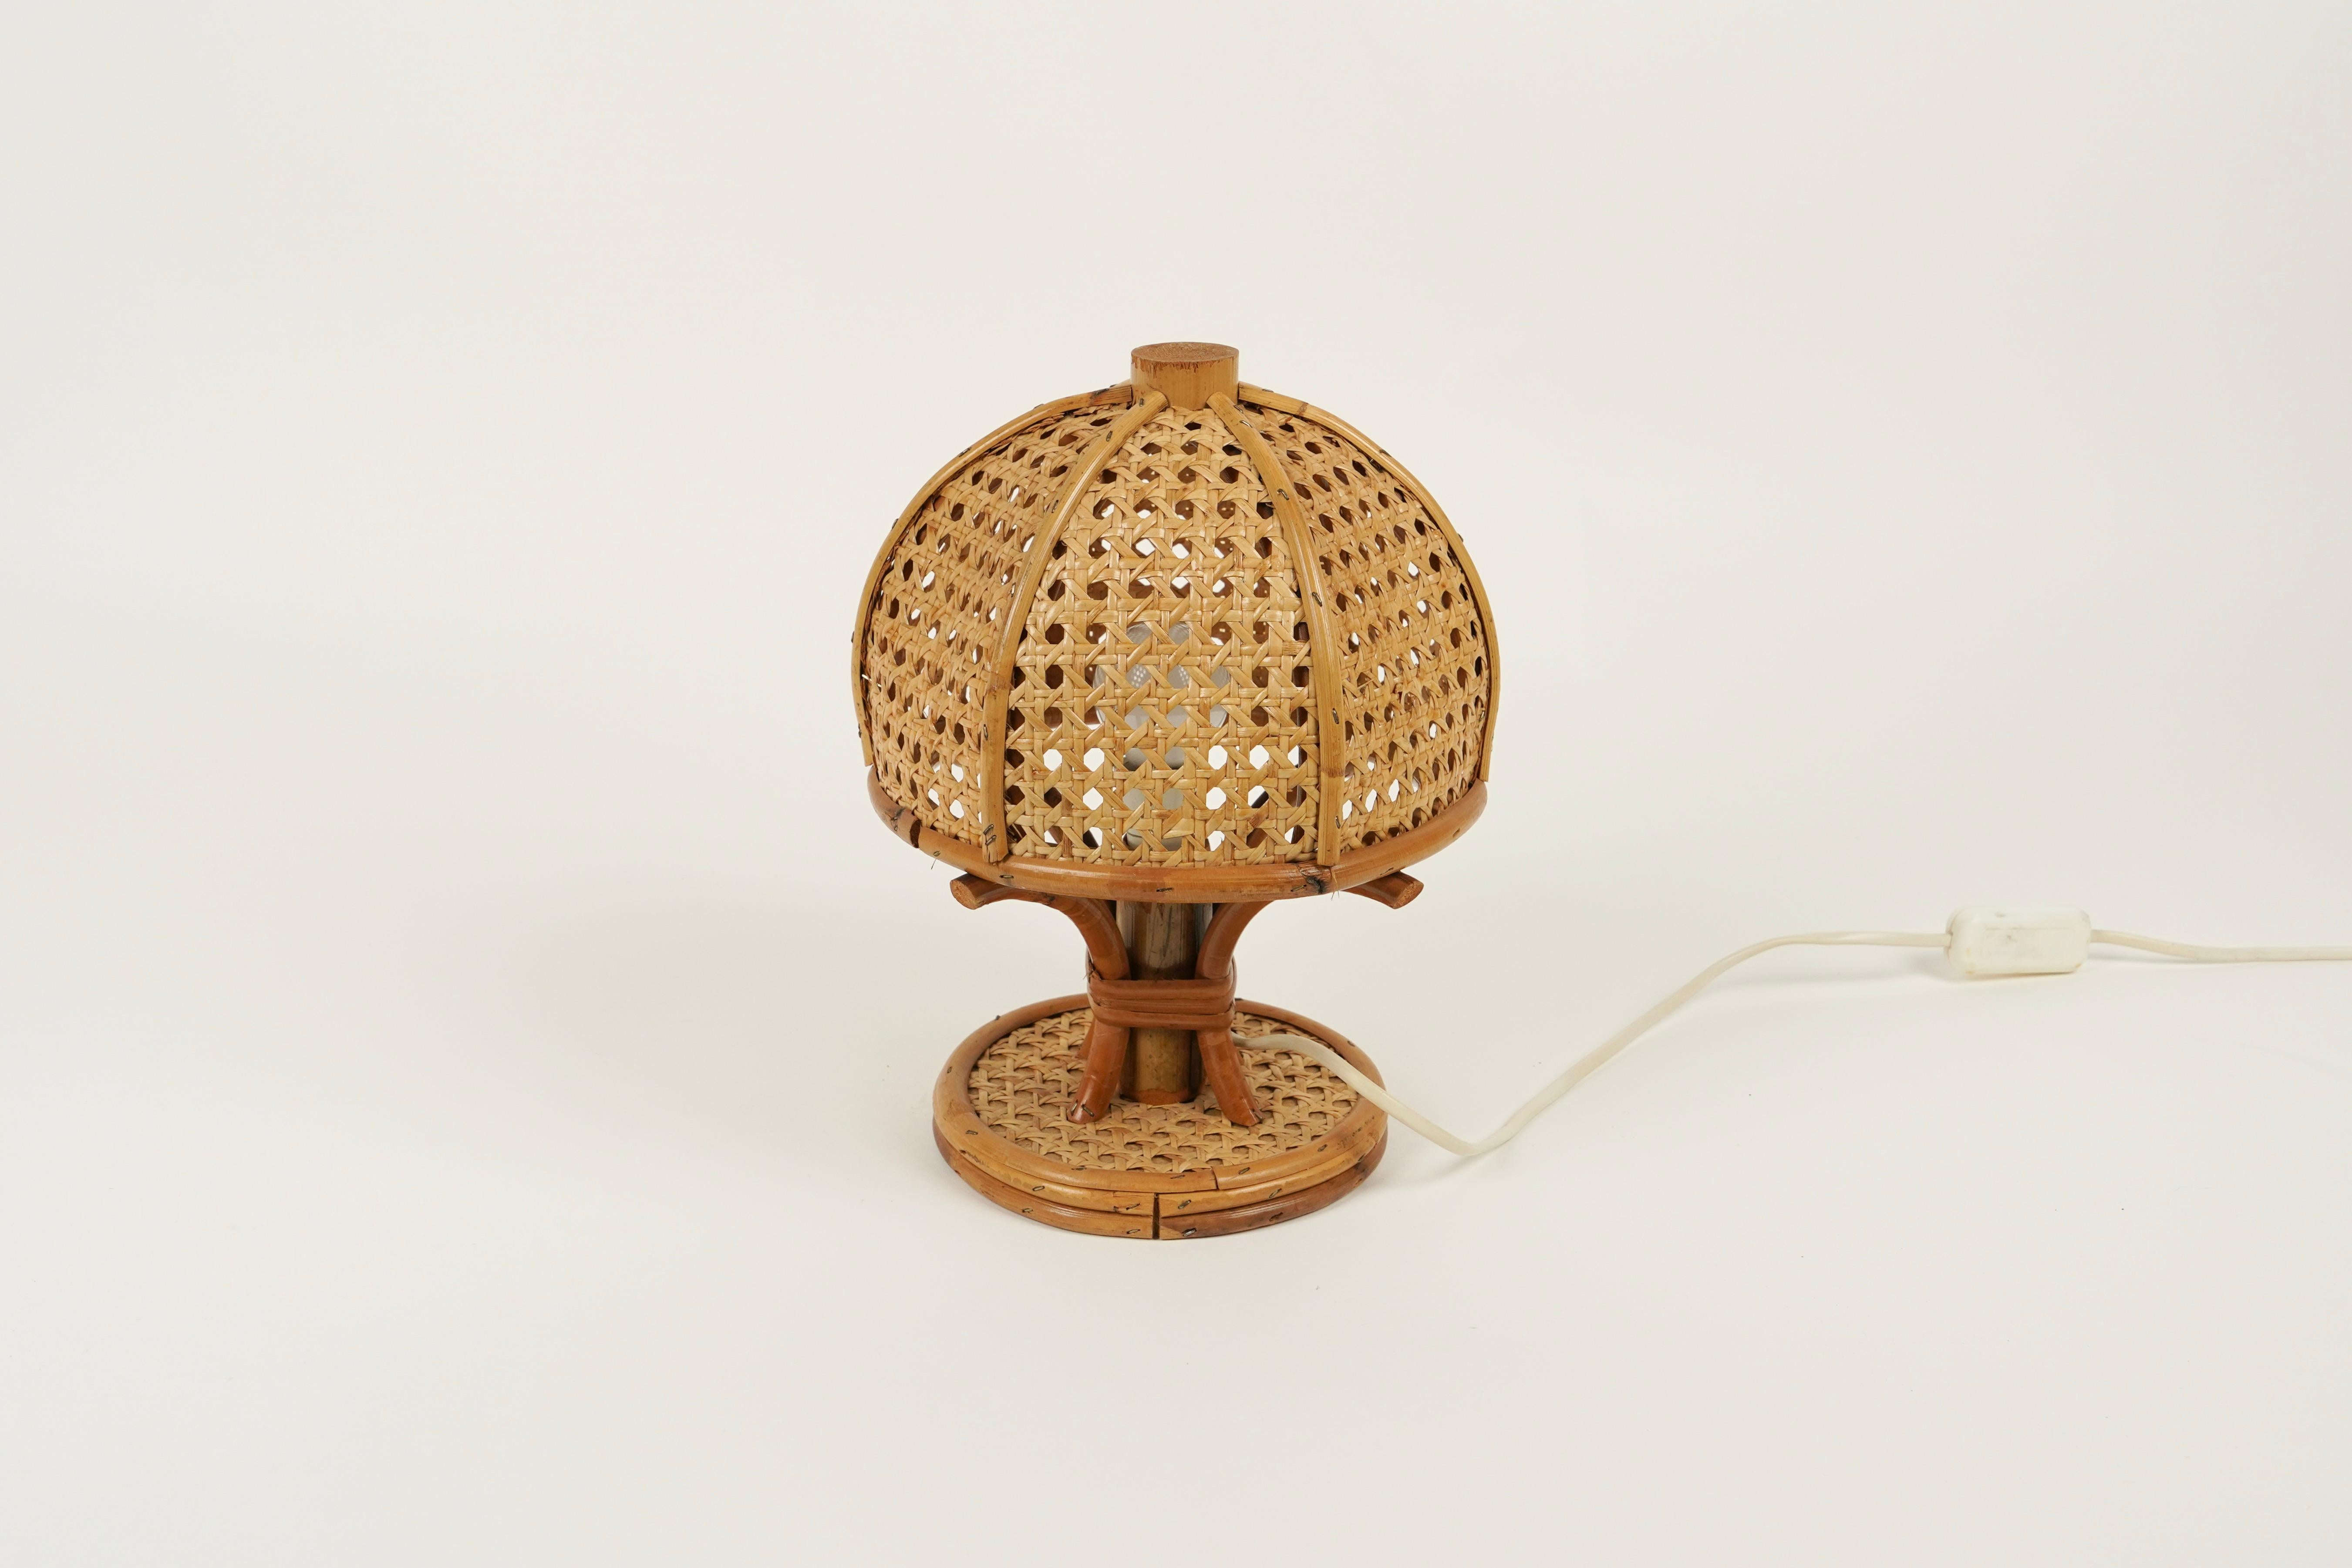 Midcentury Bamboo and Rattan Table Lamp Louis Sognot Style, Italy, 1970s For Sale 2